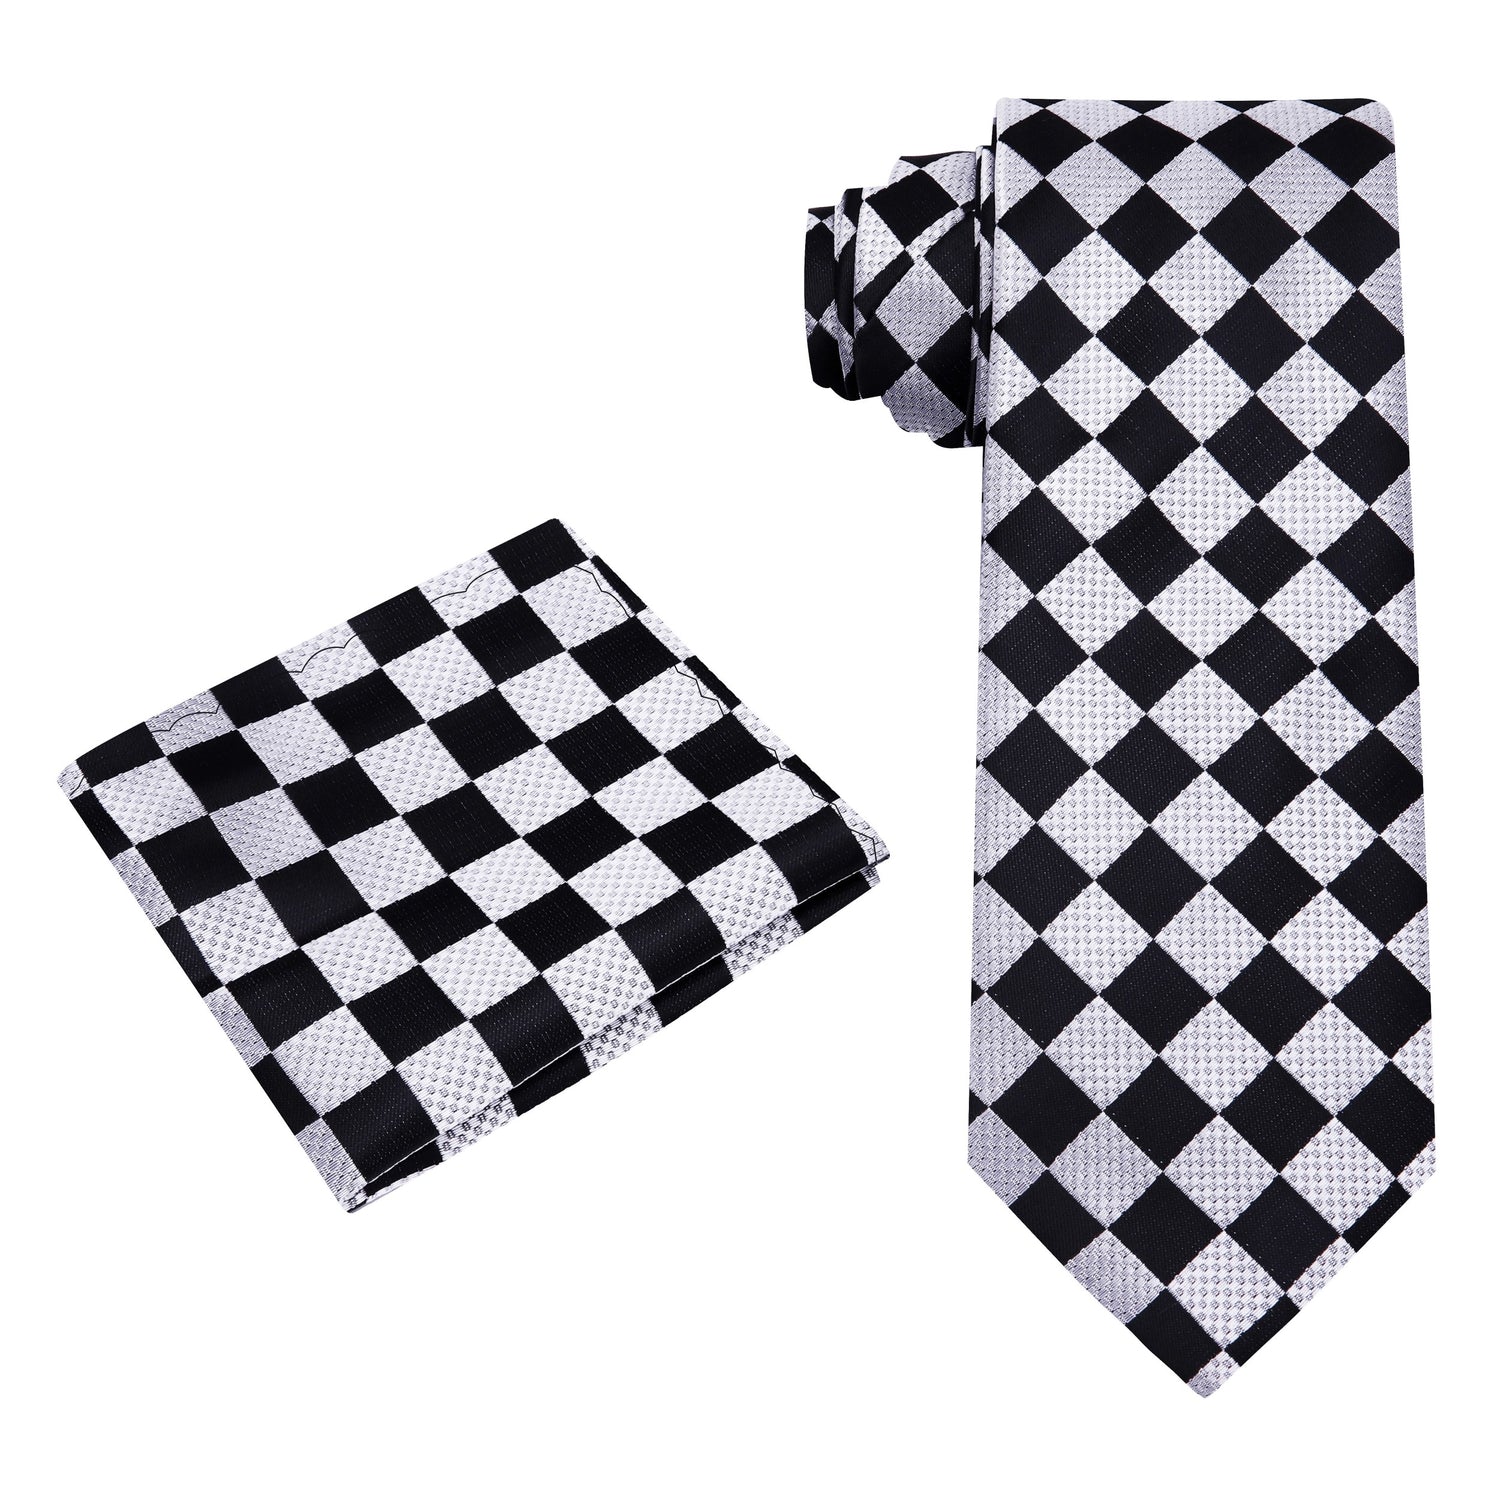 Alt View: Silver, Black Check Tie and Pocket Square